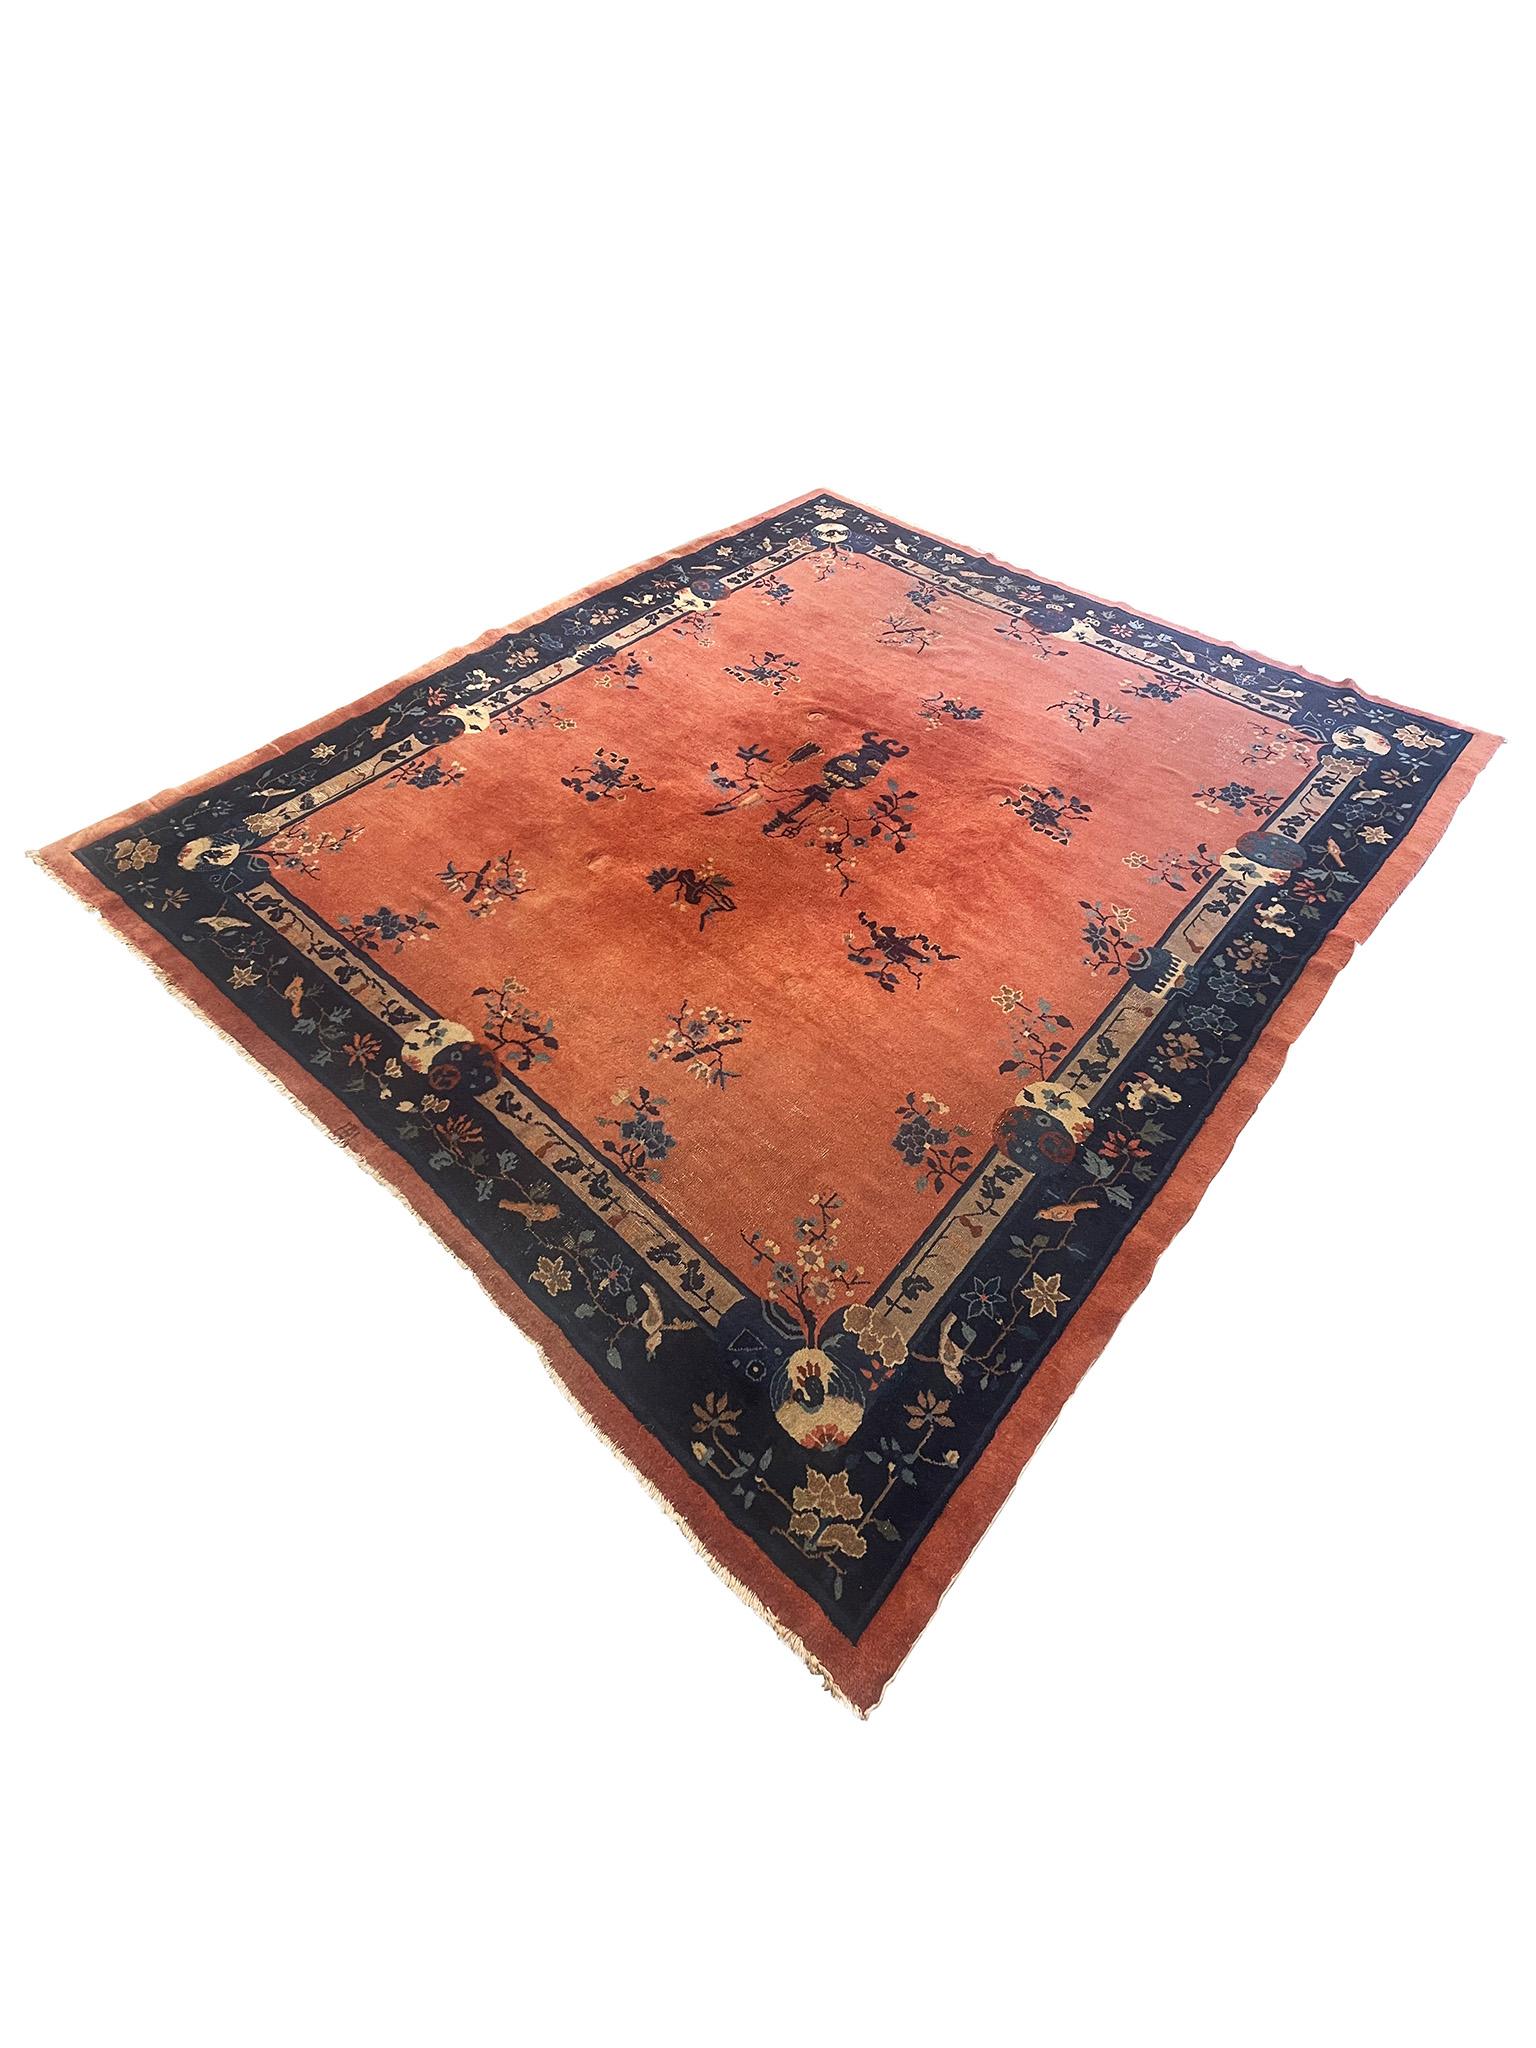 Beautiful low pile 20th century rug, designed with Chinese motifs in the style of Art Deco. Crafted in quintessential Art Deco vibrant hues of navy and rust, this rug features floral, branch, and bird motifs with a depiction of a Chinese-style vase